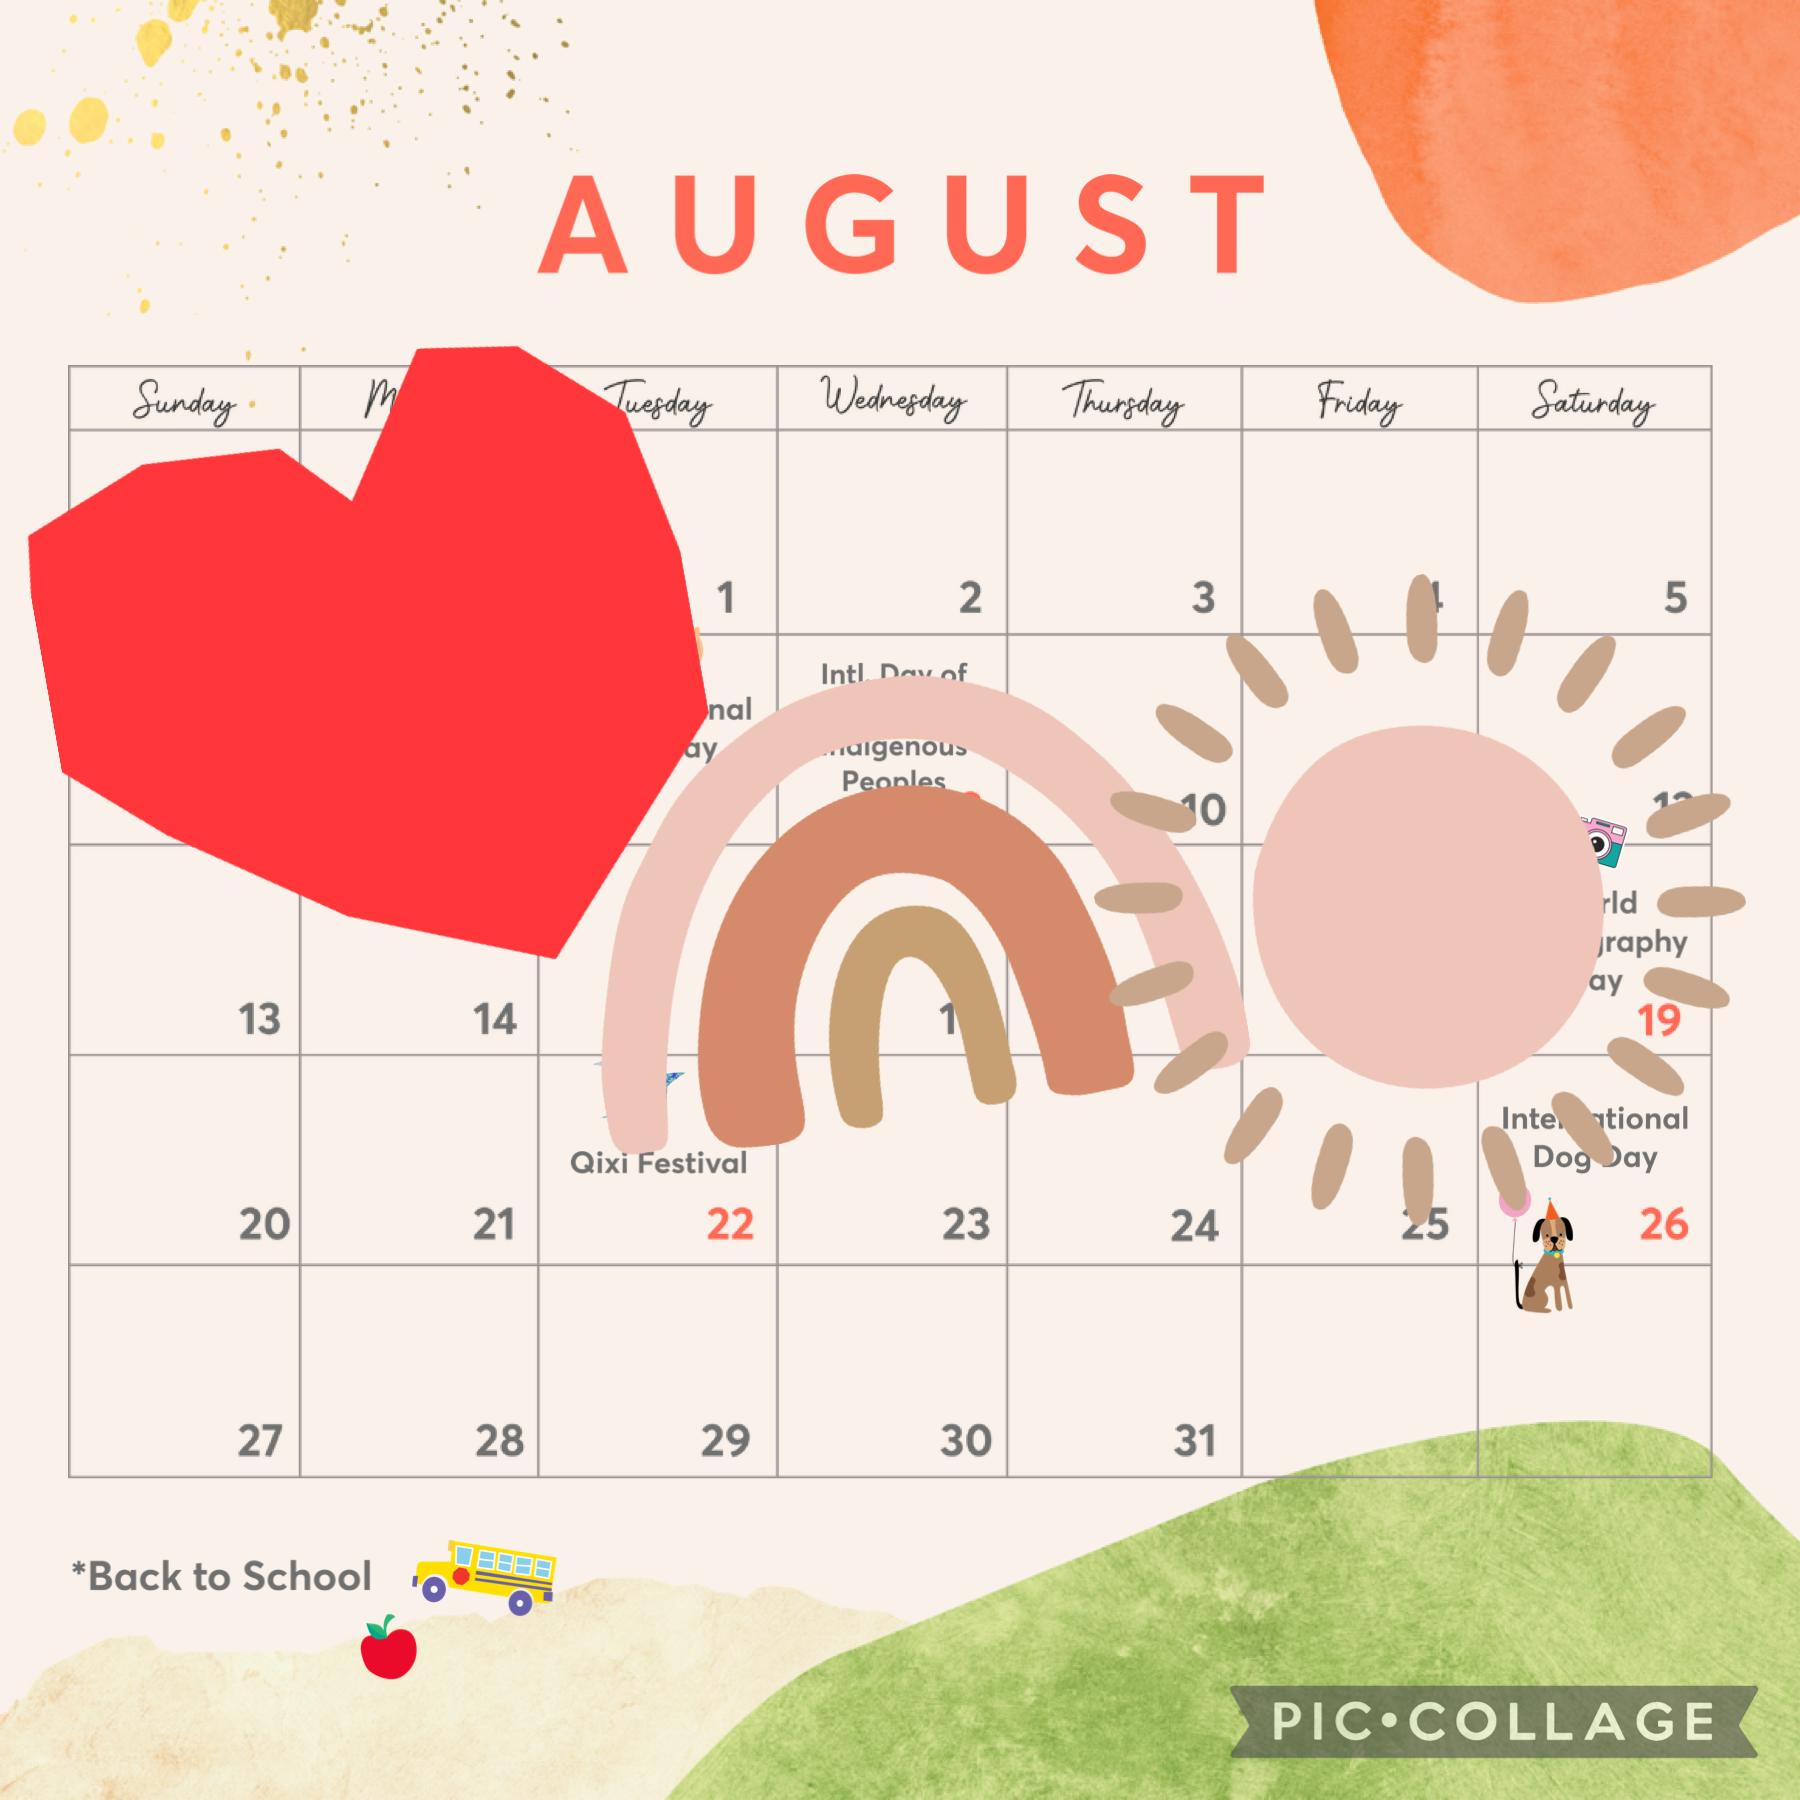 #august